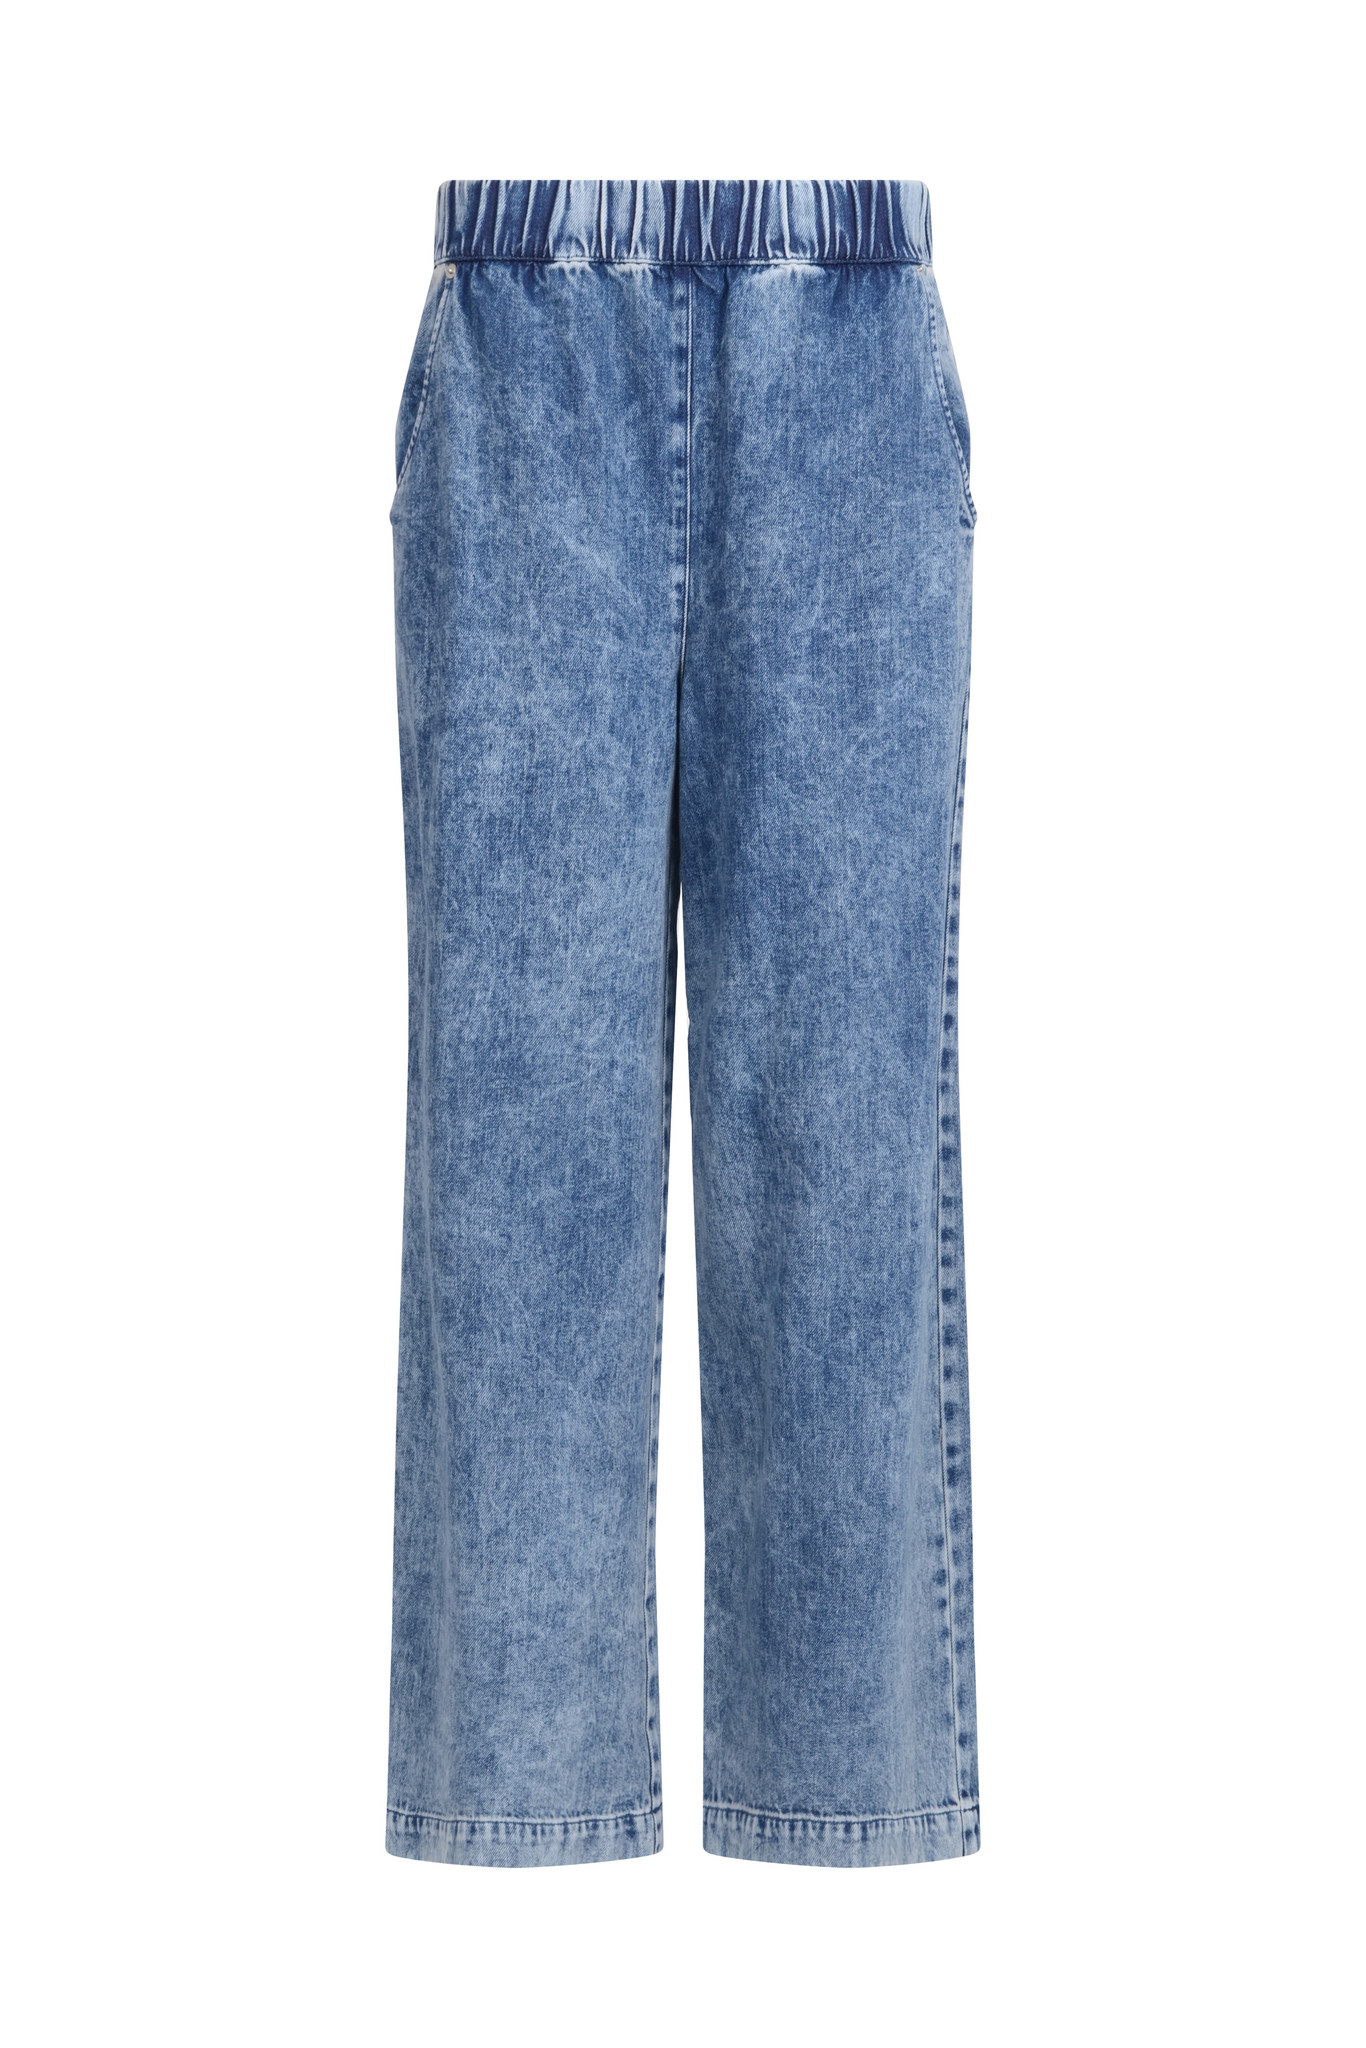 POLLY JEANS IN BLUE WASH-1